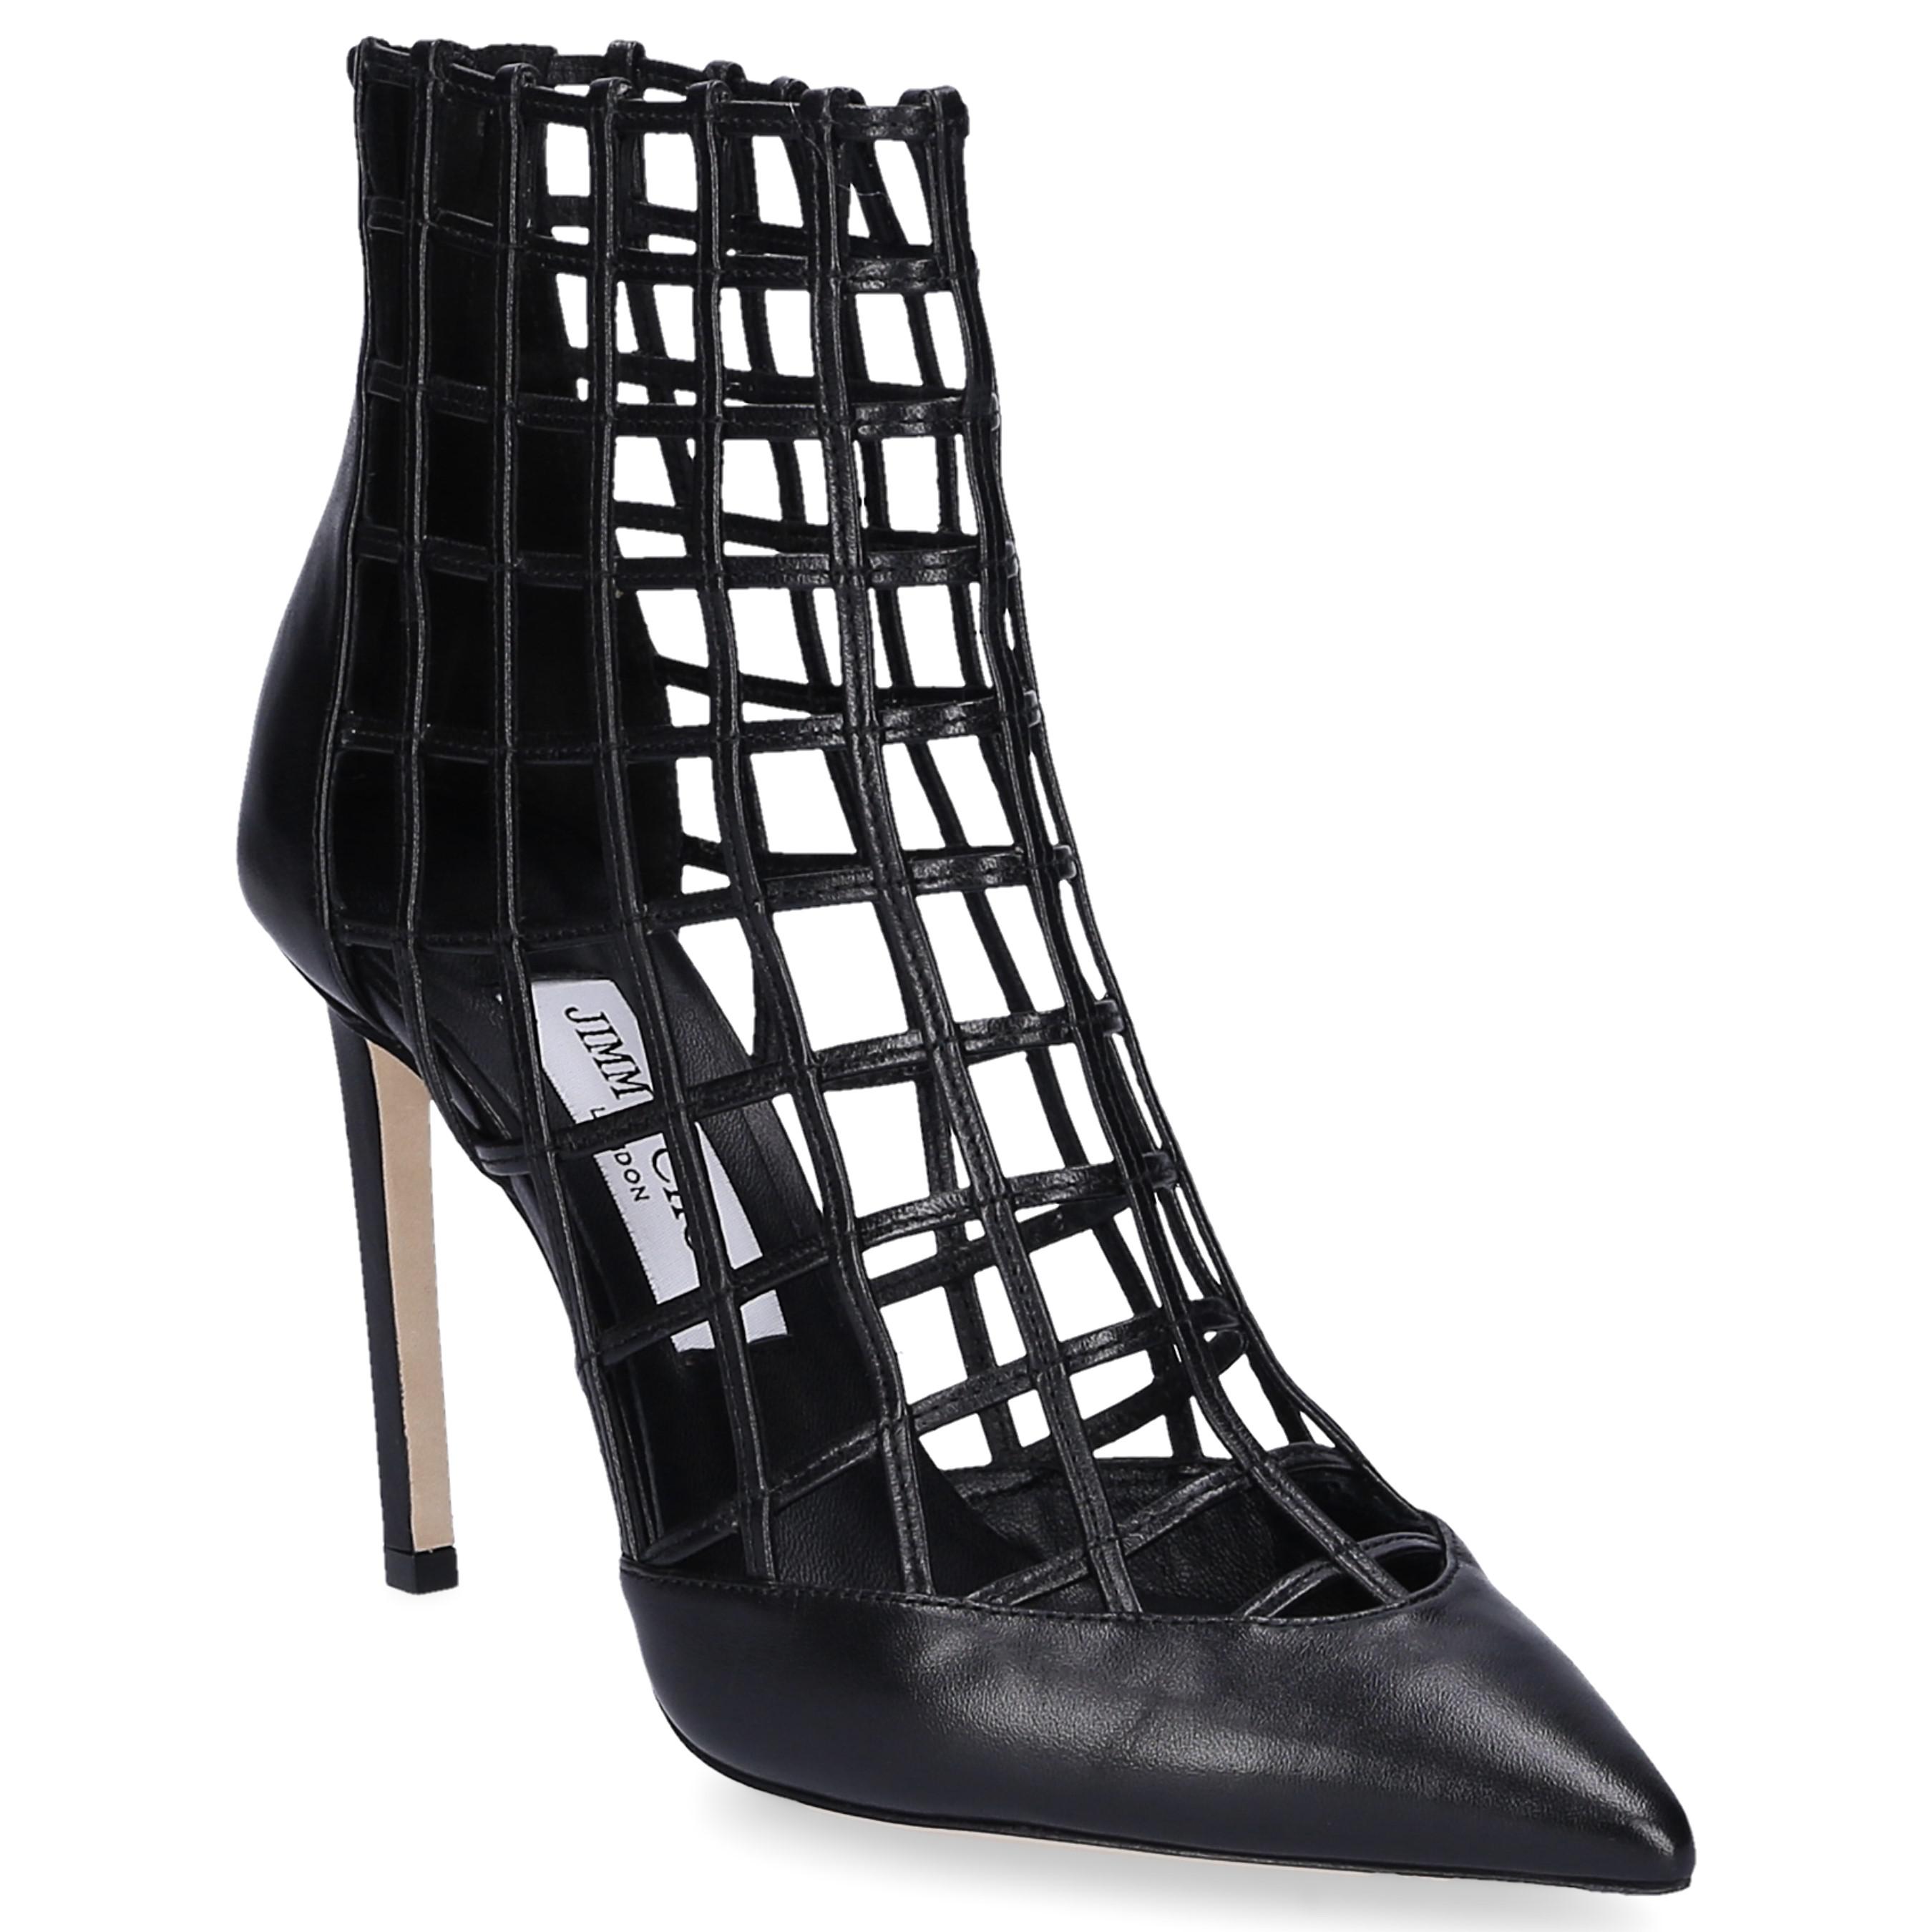 Jimmy Choo Sheldon 100 Leather Caged Bootie in Black - Lyst